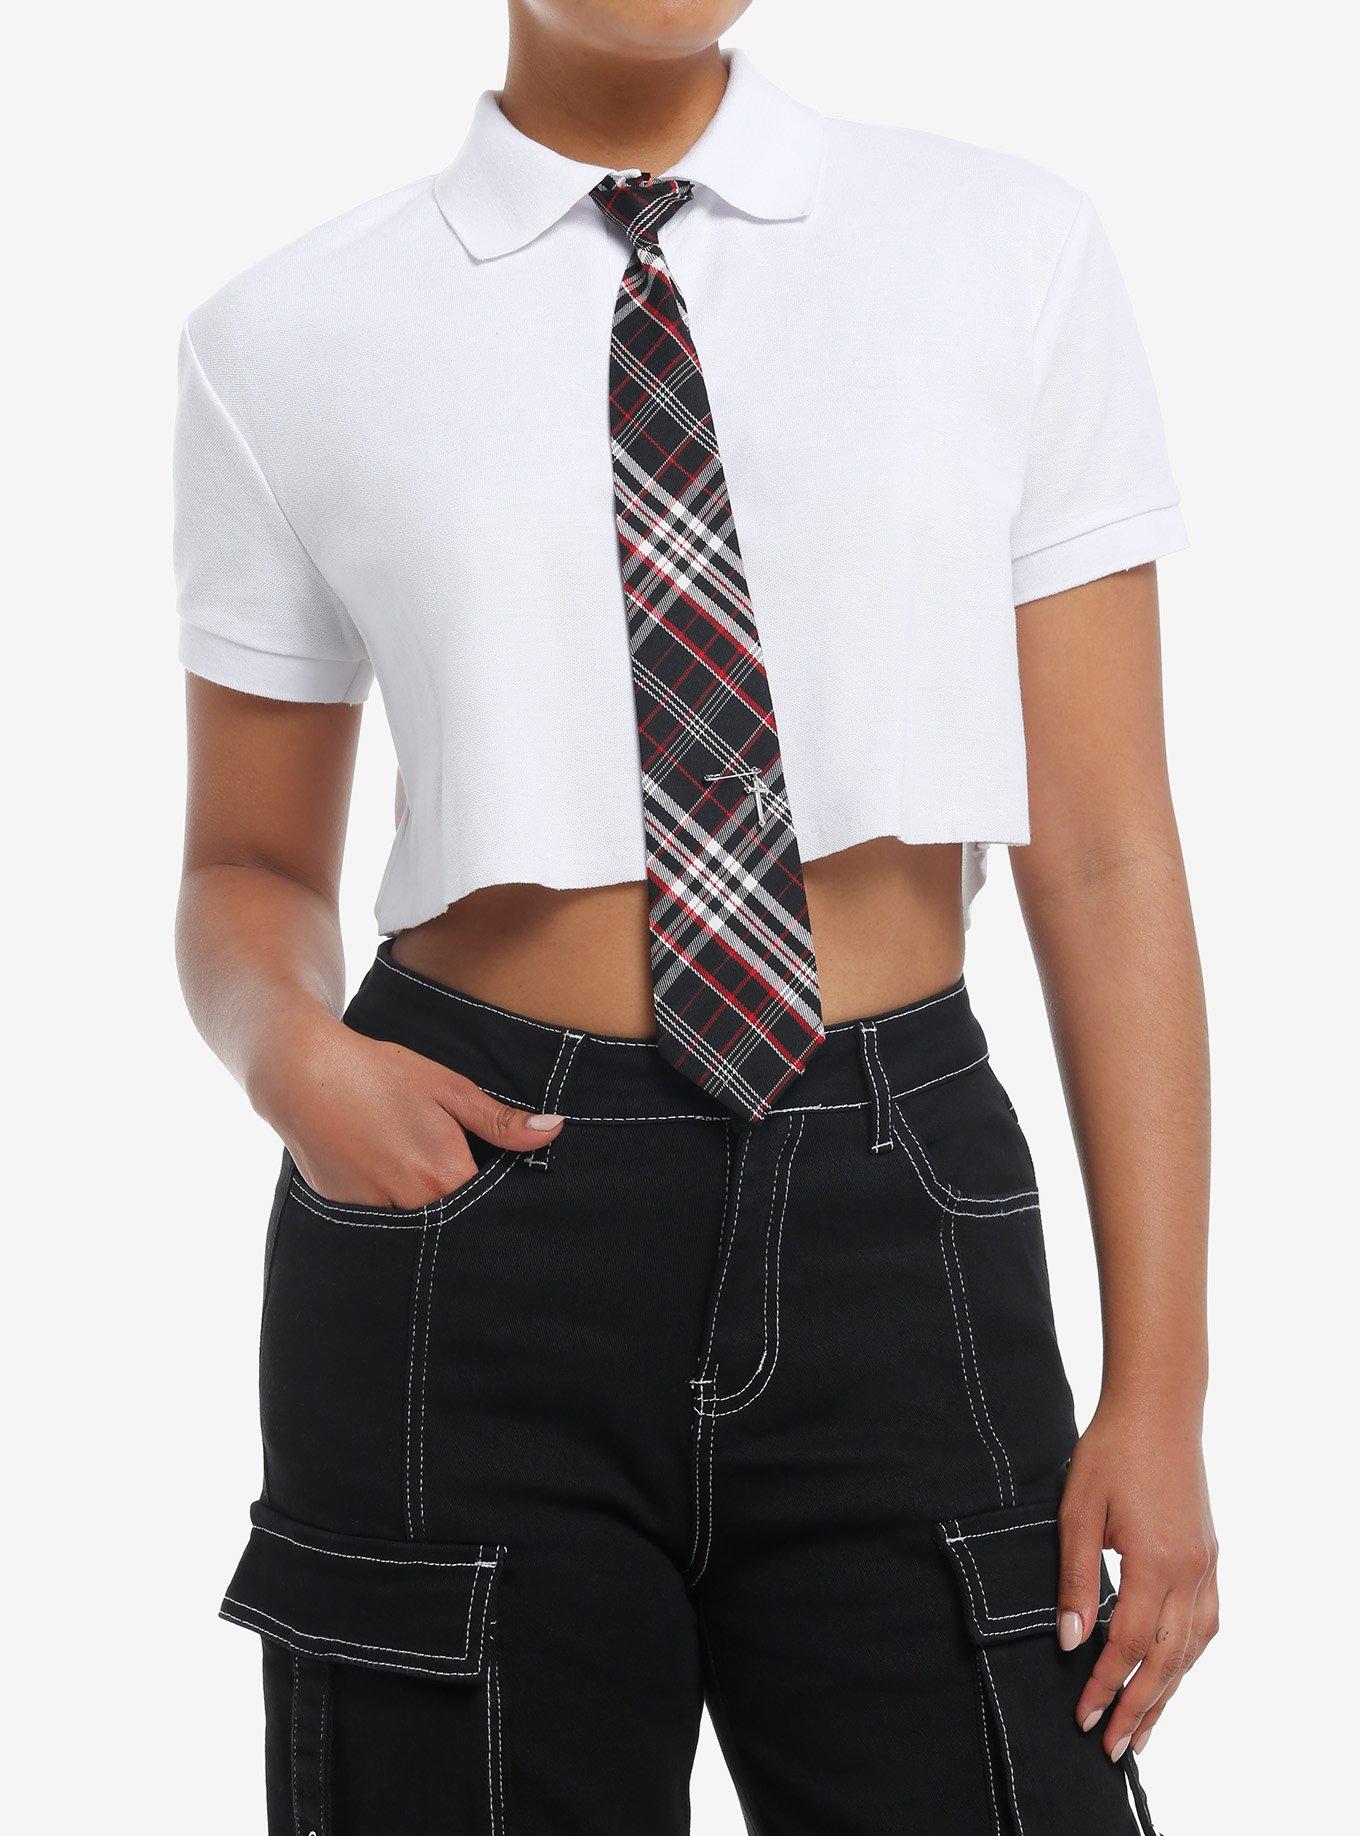 Social Collision White Polo Girls Crop Top With Tie